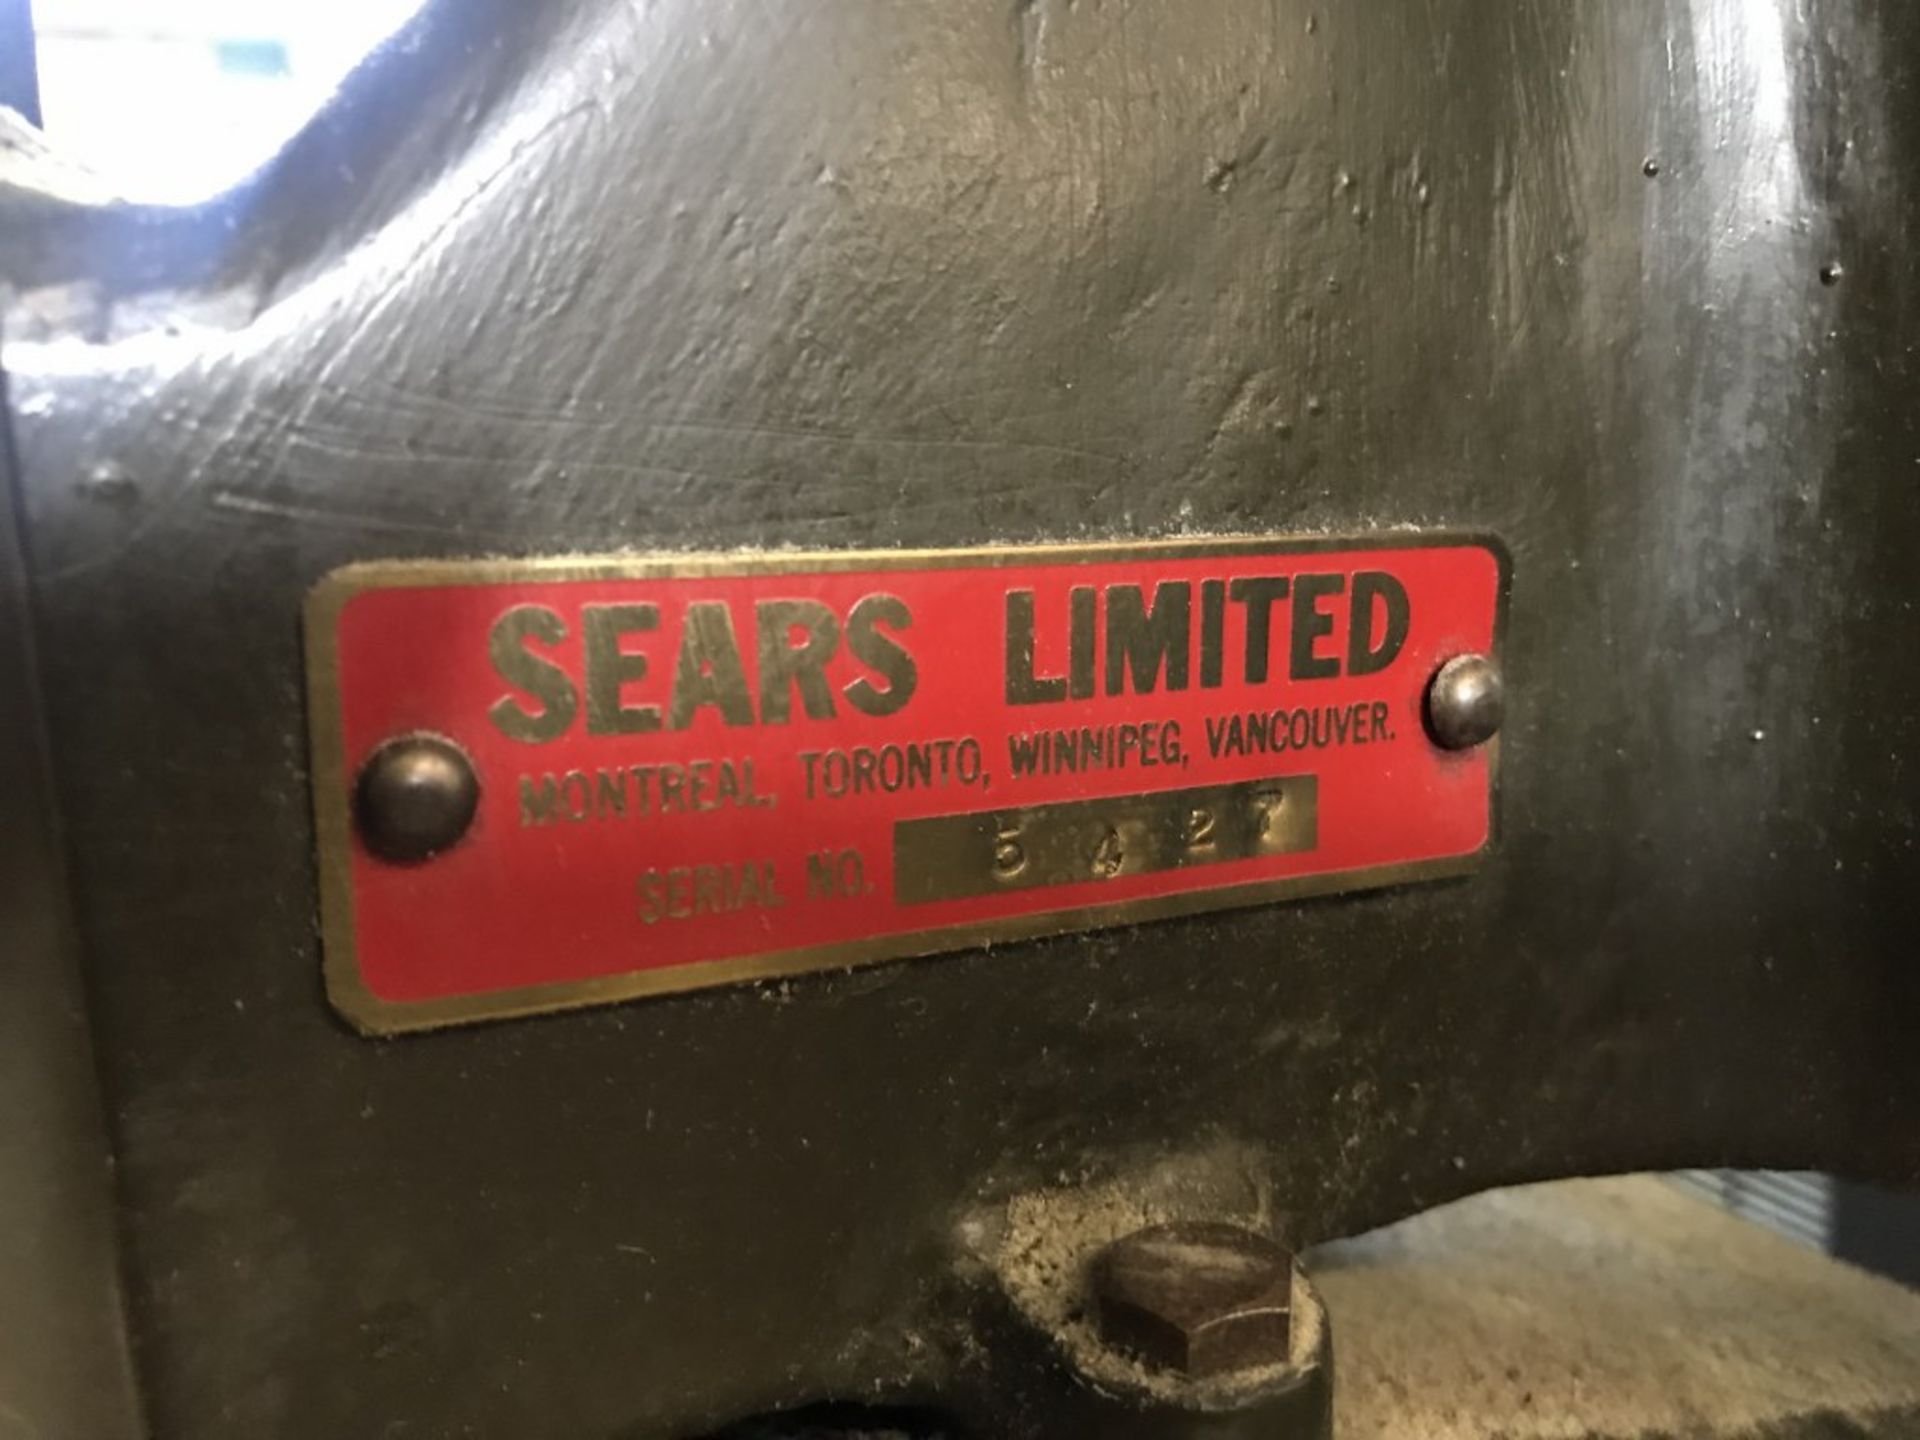 SEARS LIMITED STATIONARY DRILL PRESS - Image 3 of 3